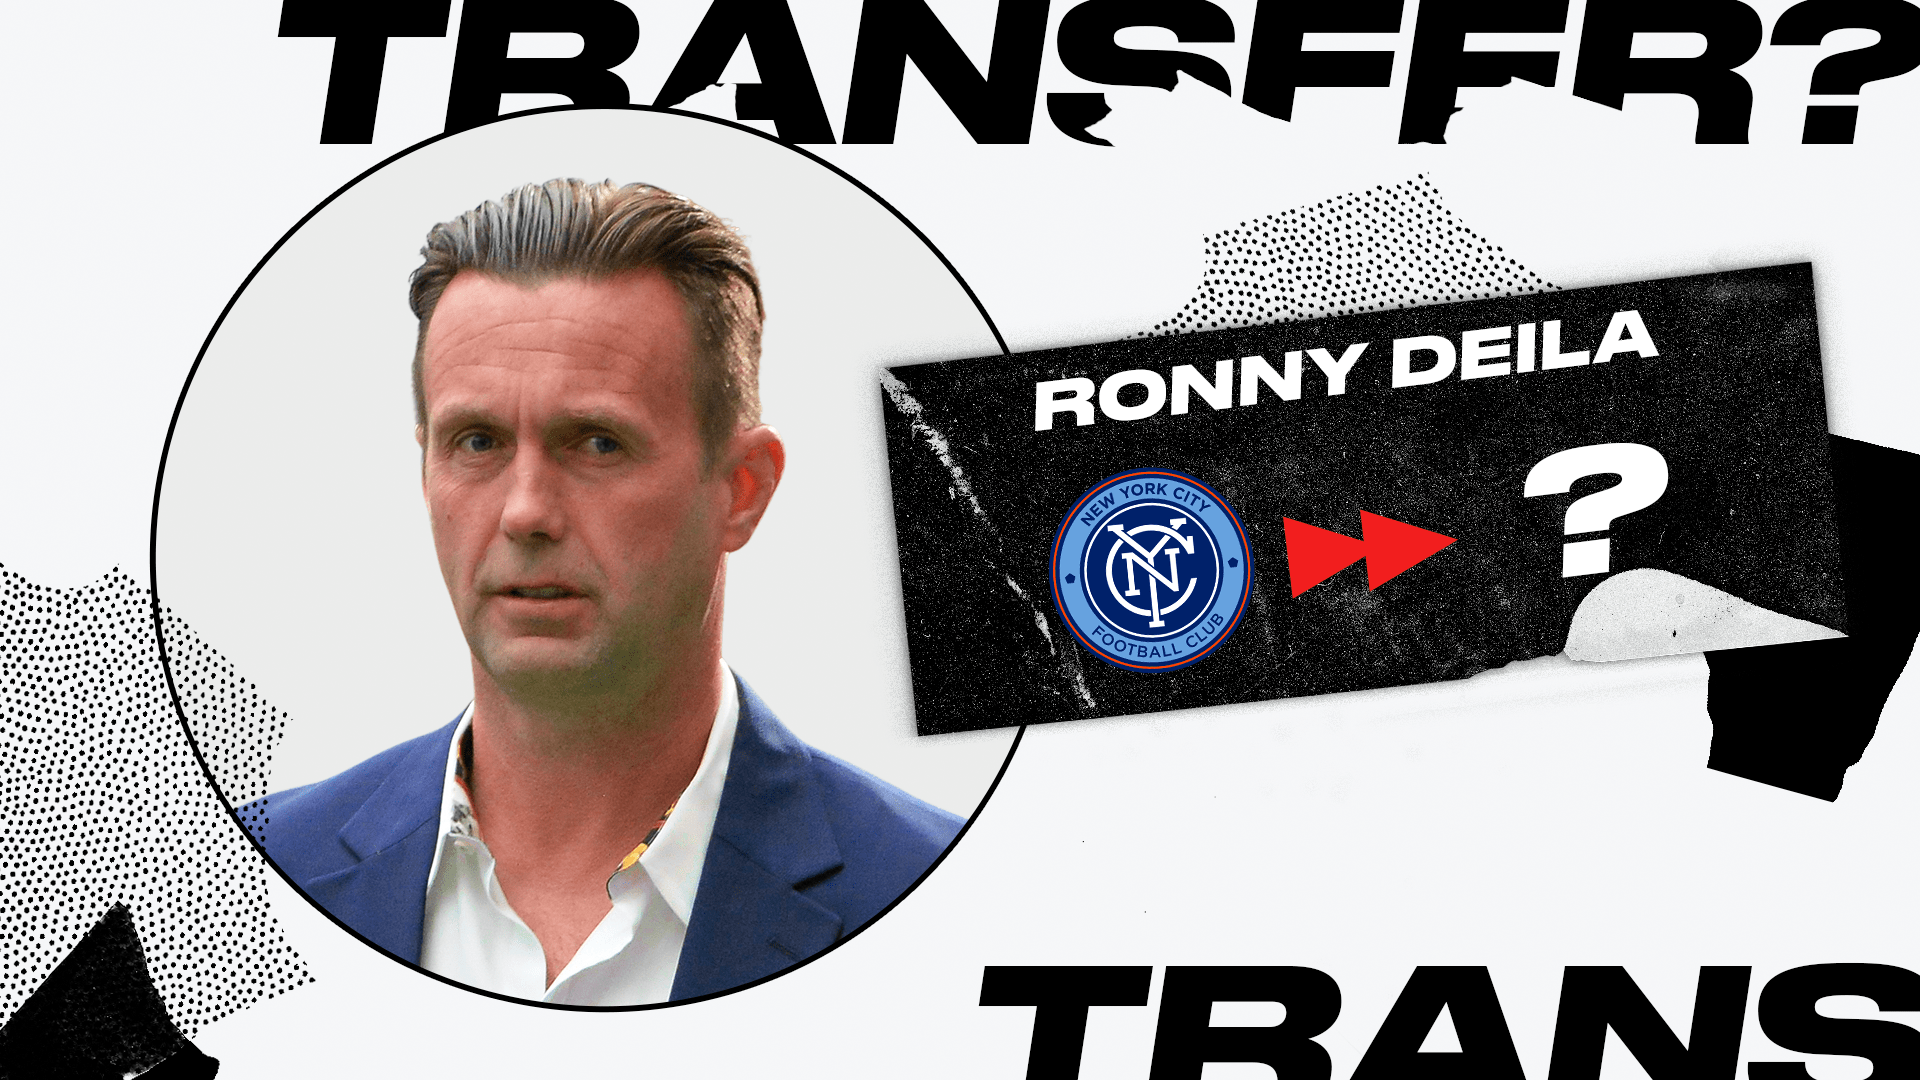 Report: NYCFC coach Ronny Deila "in conversations" with Standard Liège of Belgium